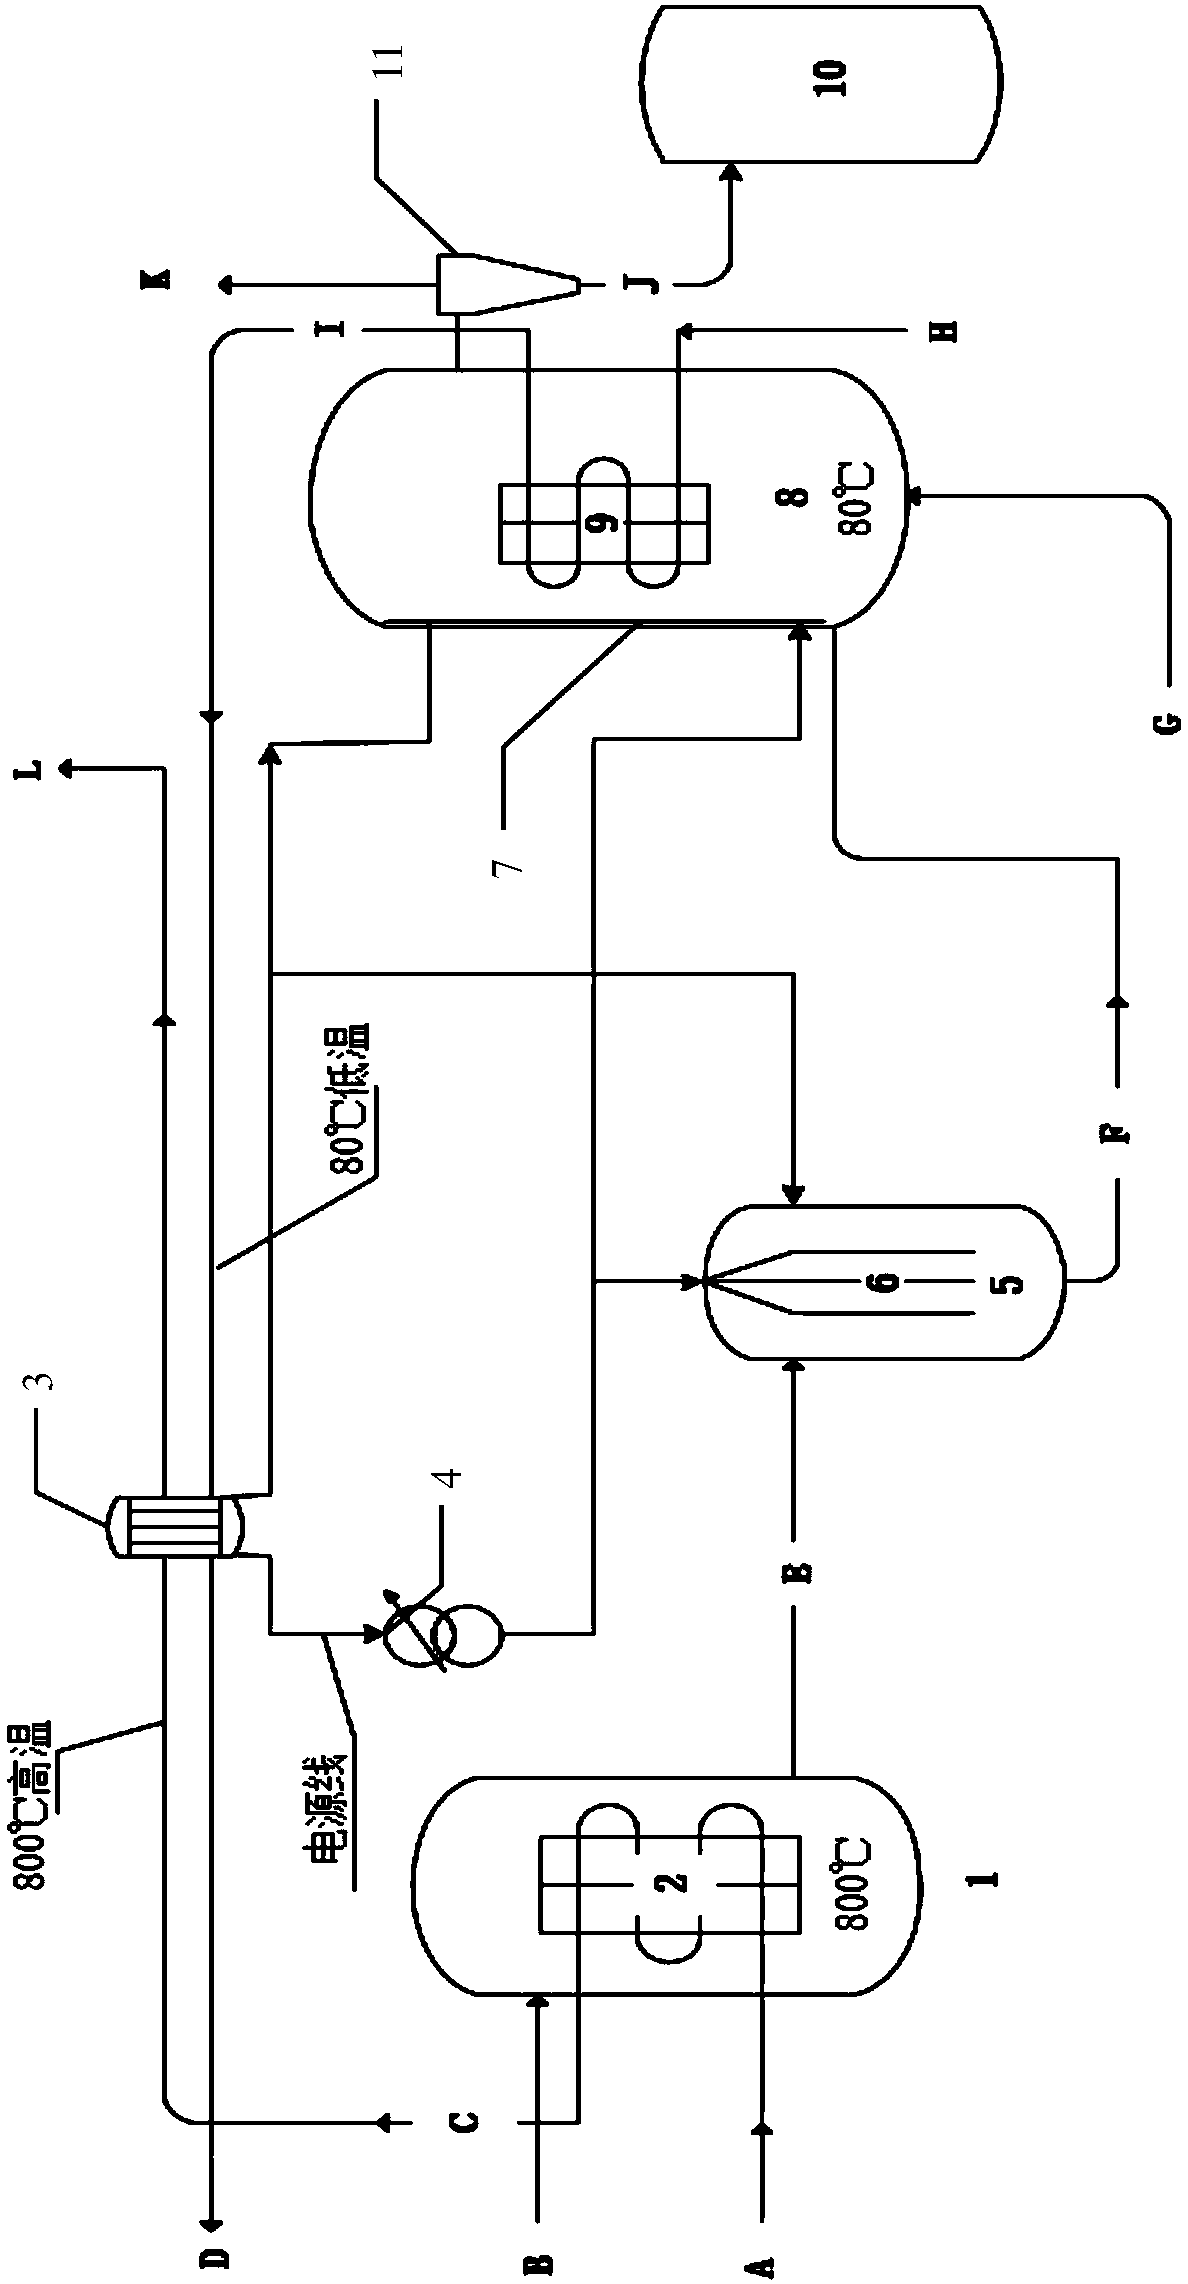 Device and method for removing CO2 from power plant flue gas with fly ash